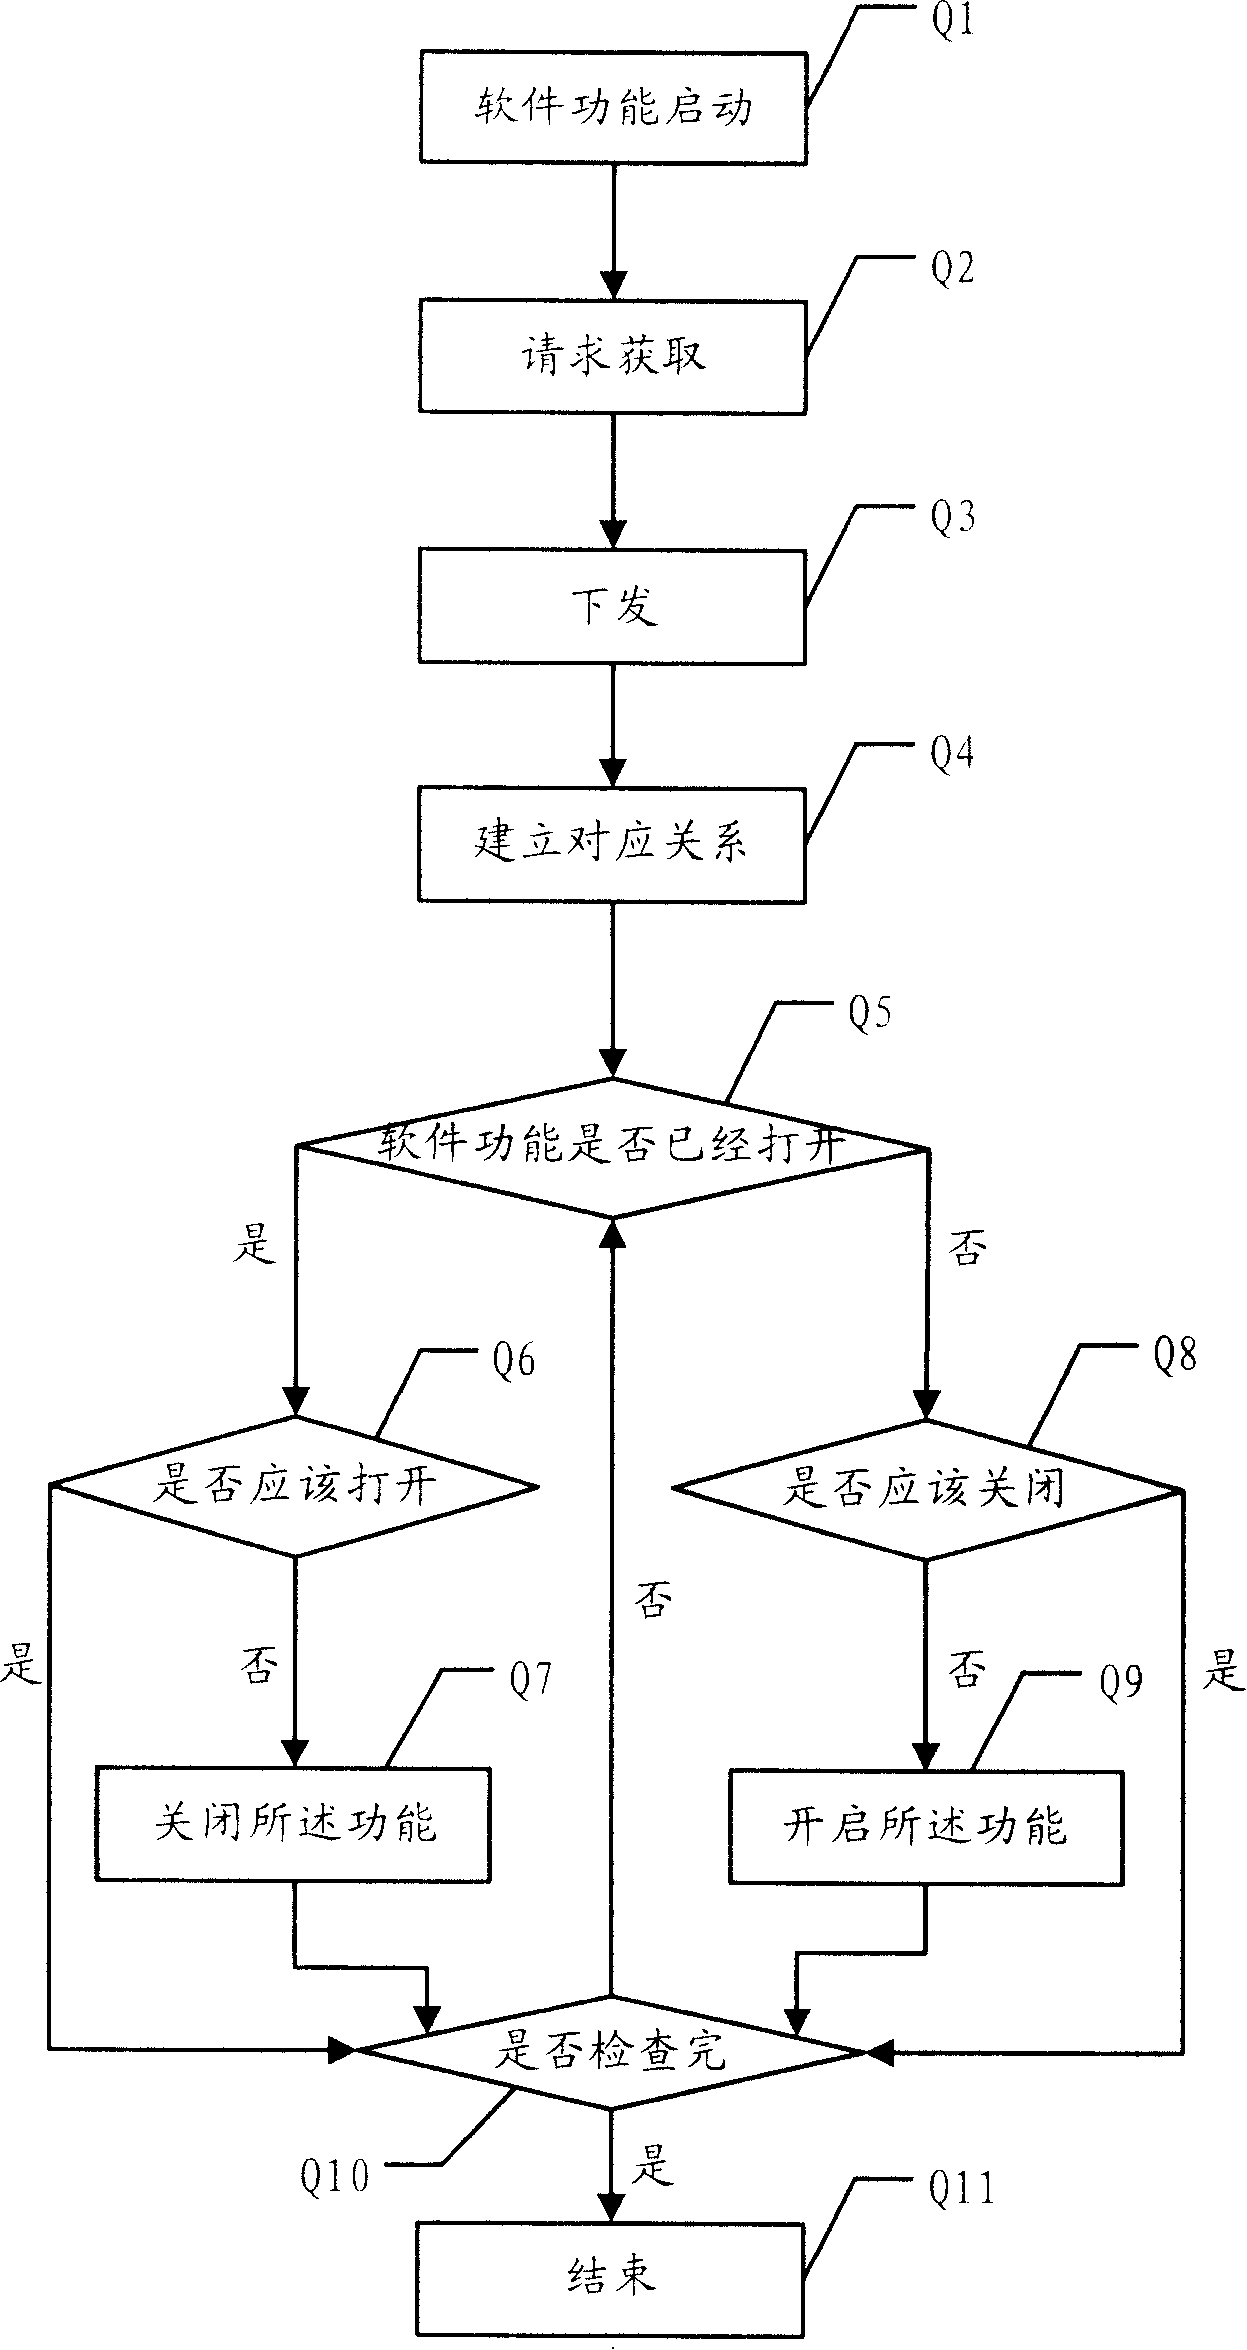 Method and system for controlling software function